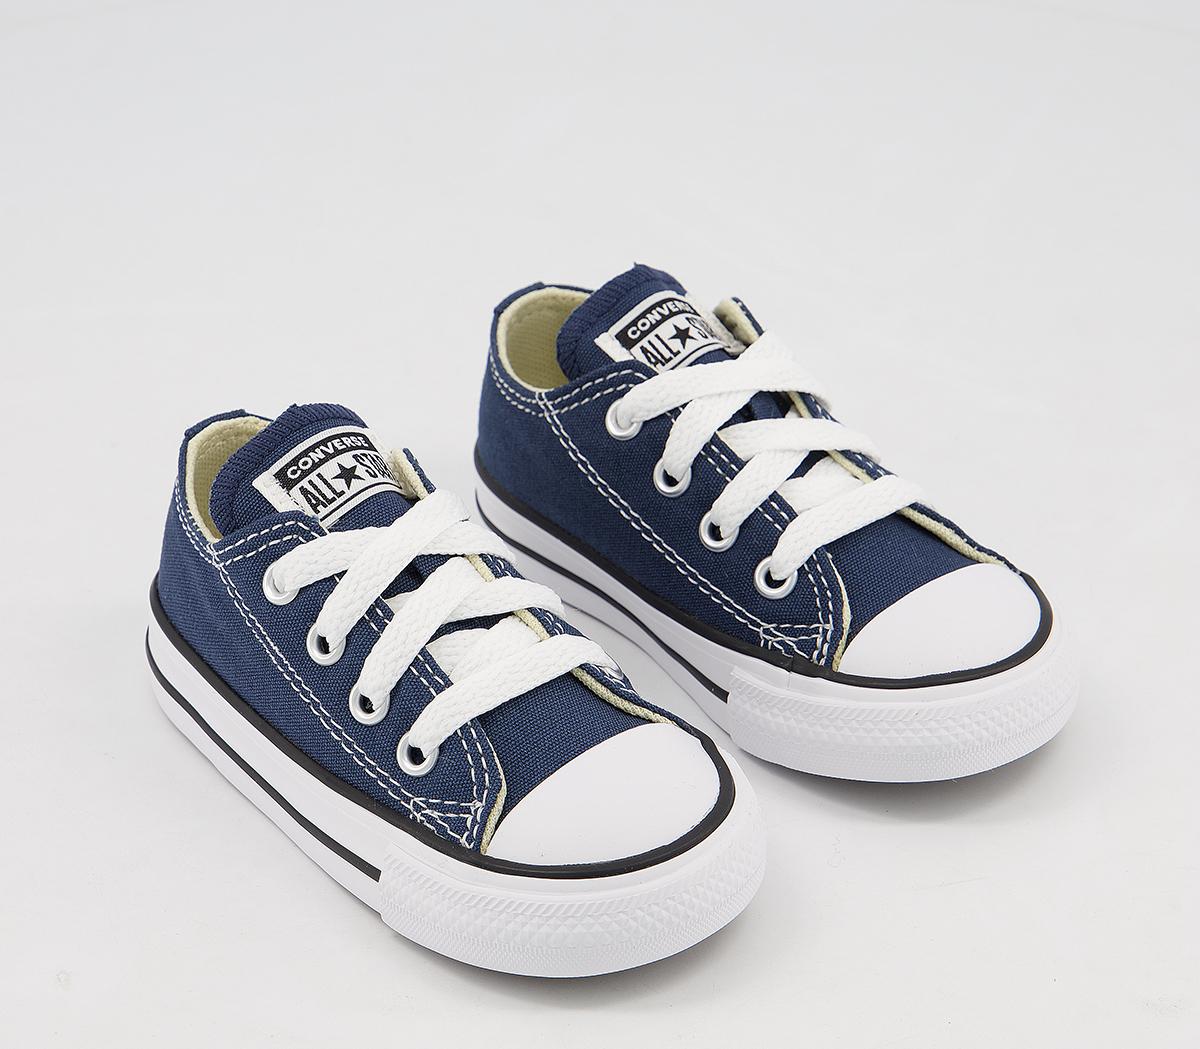 Kids Converse Baby Boys All Star Low Shoes In Navy Blue And White, 4 Infant